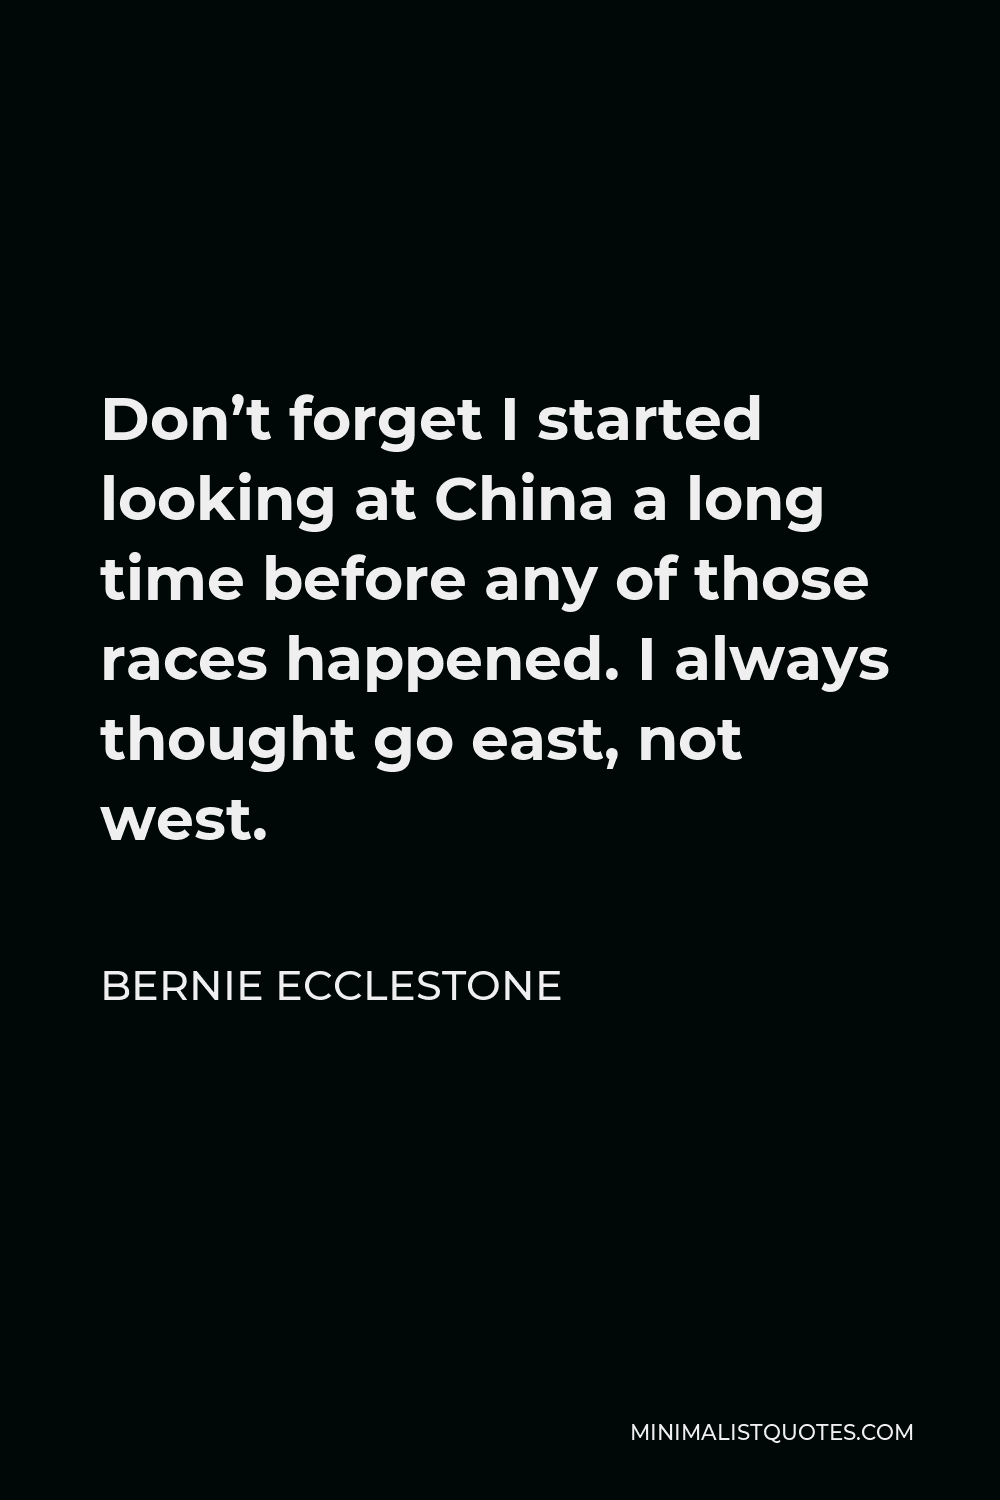 Bernie Ecclestone Quote - Don’t forget I started looking at China a long time before any of those races happened. I always thought go east, not west.